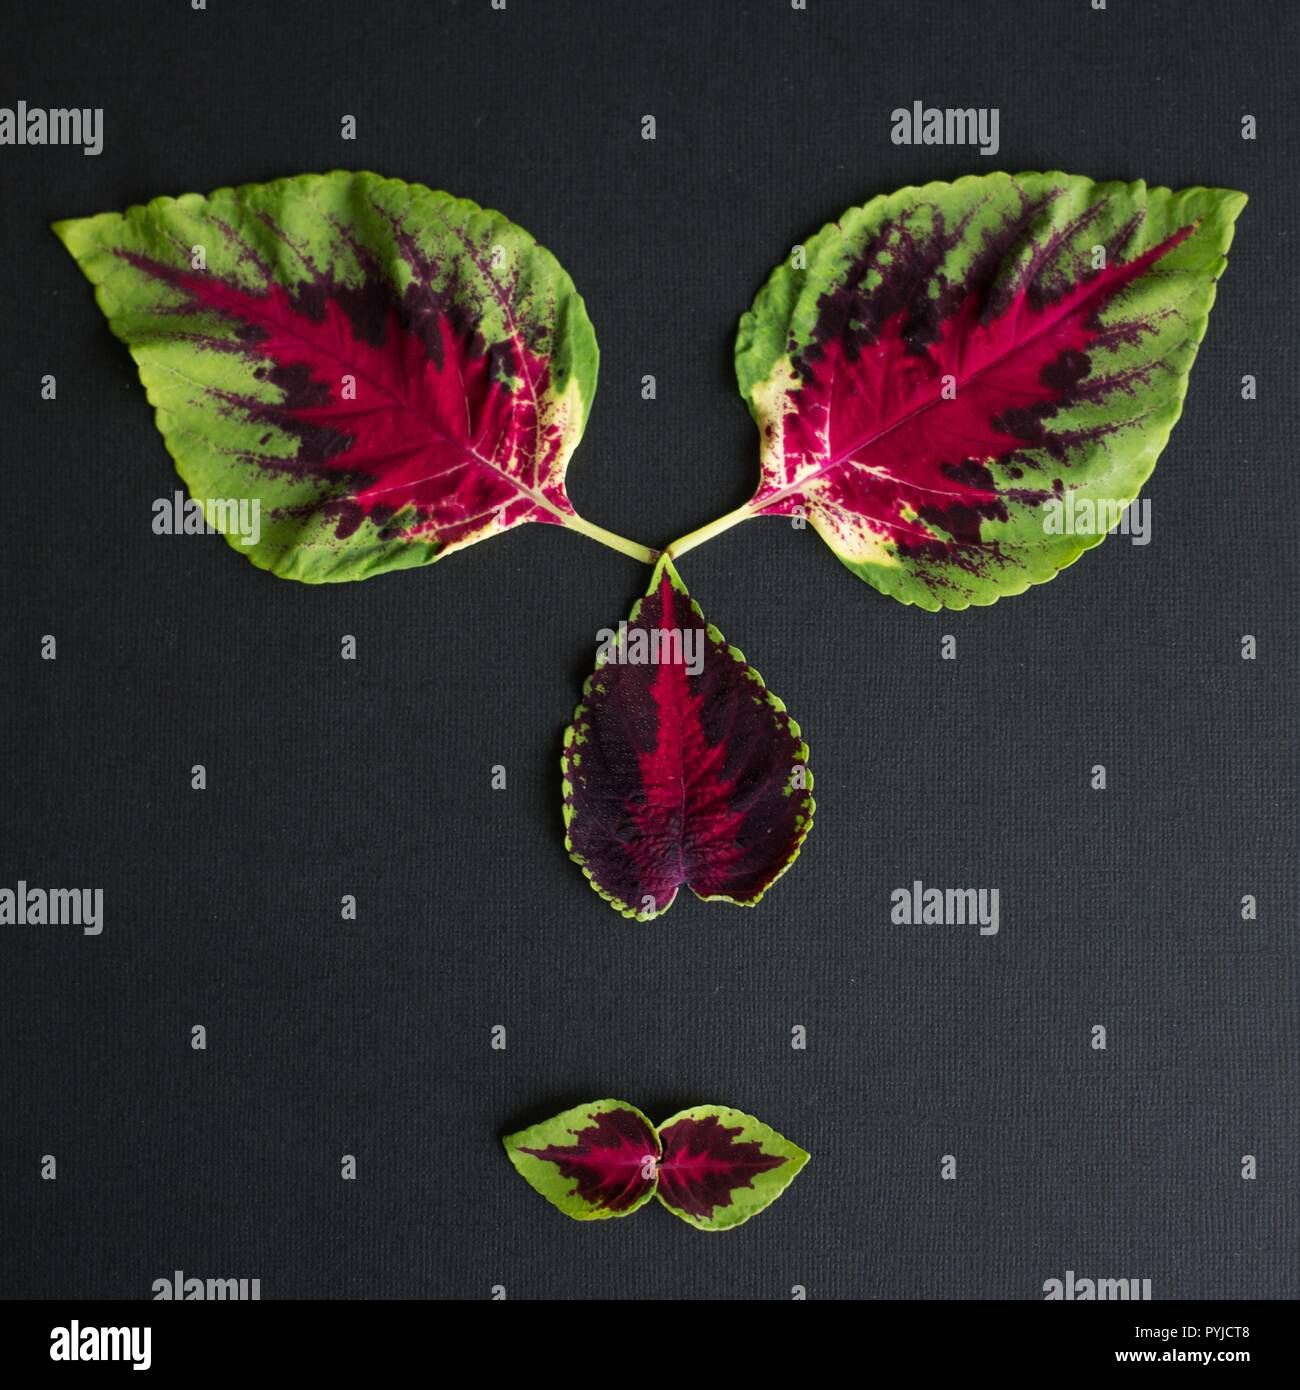 Leaves from a coleus plant on a black background. Stock Photo